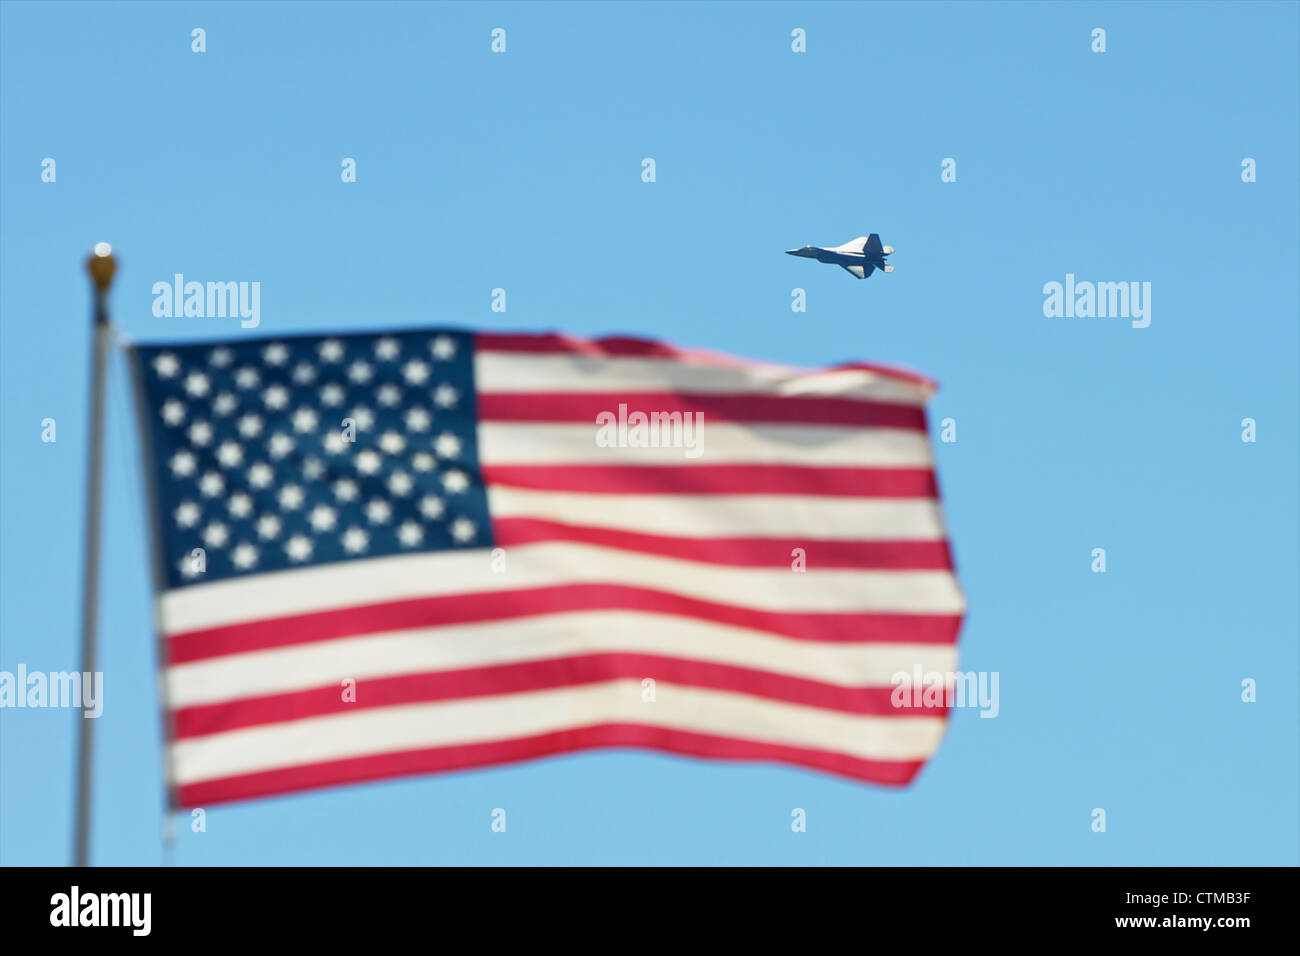 F-22 Raptor fighter jet flying behind an american flag Stock Photo